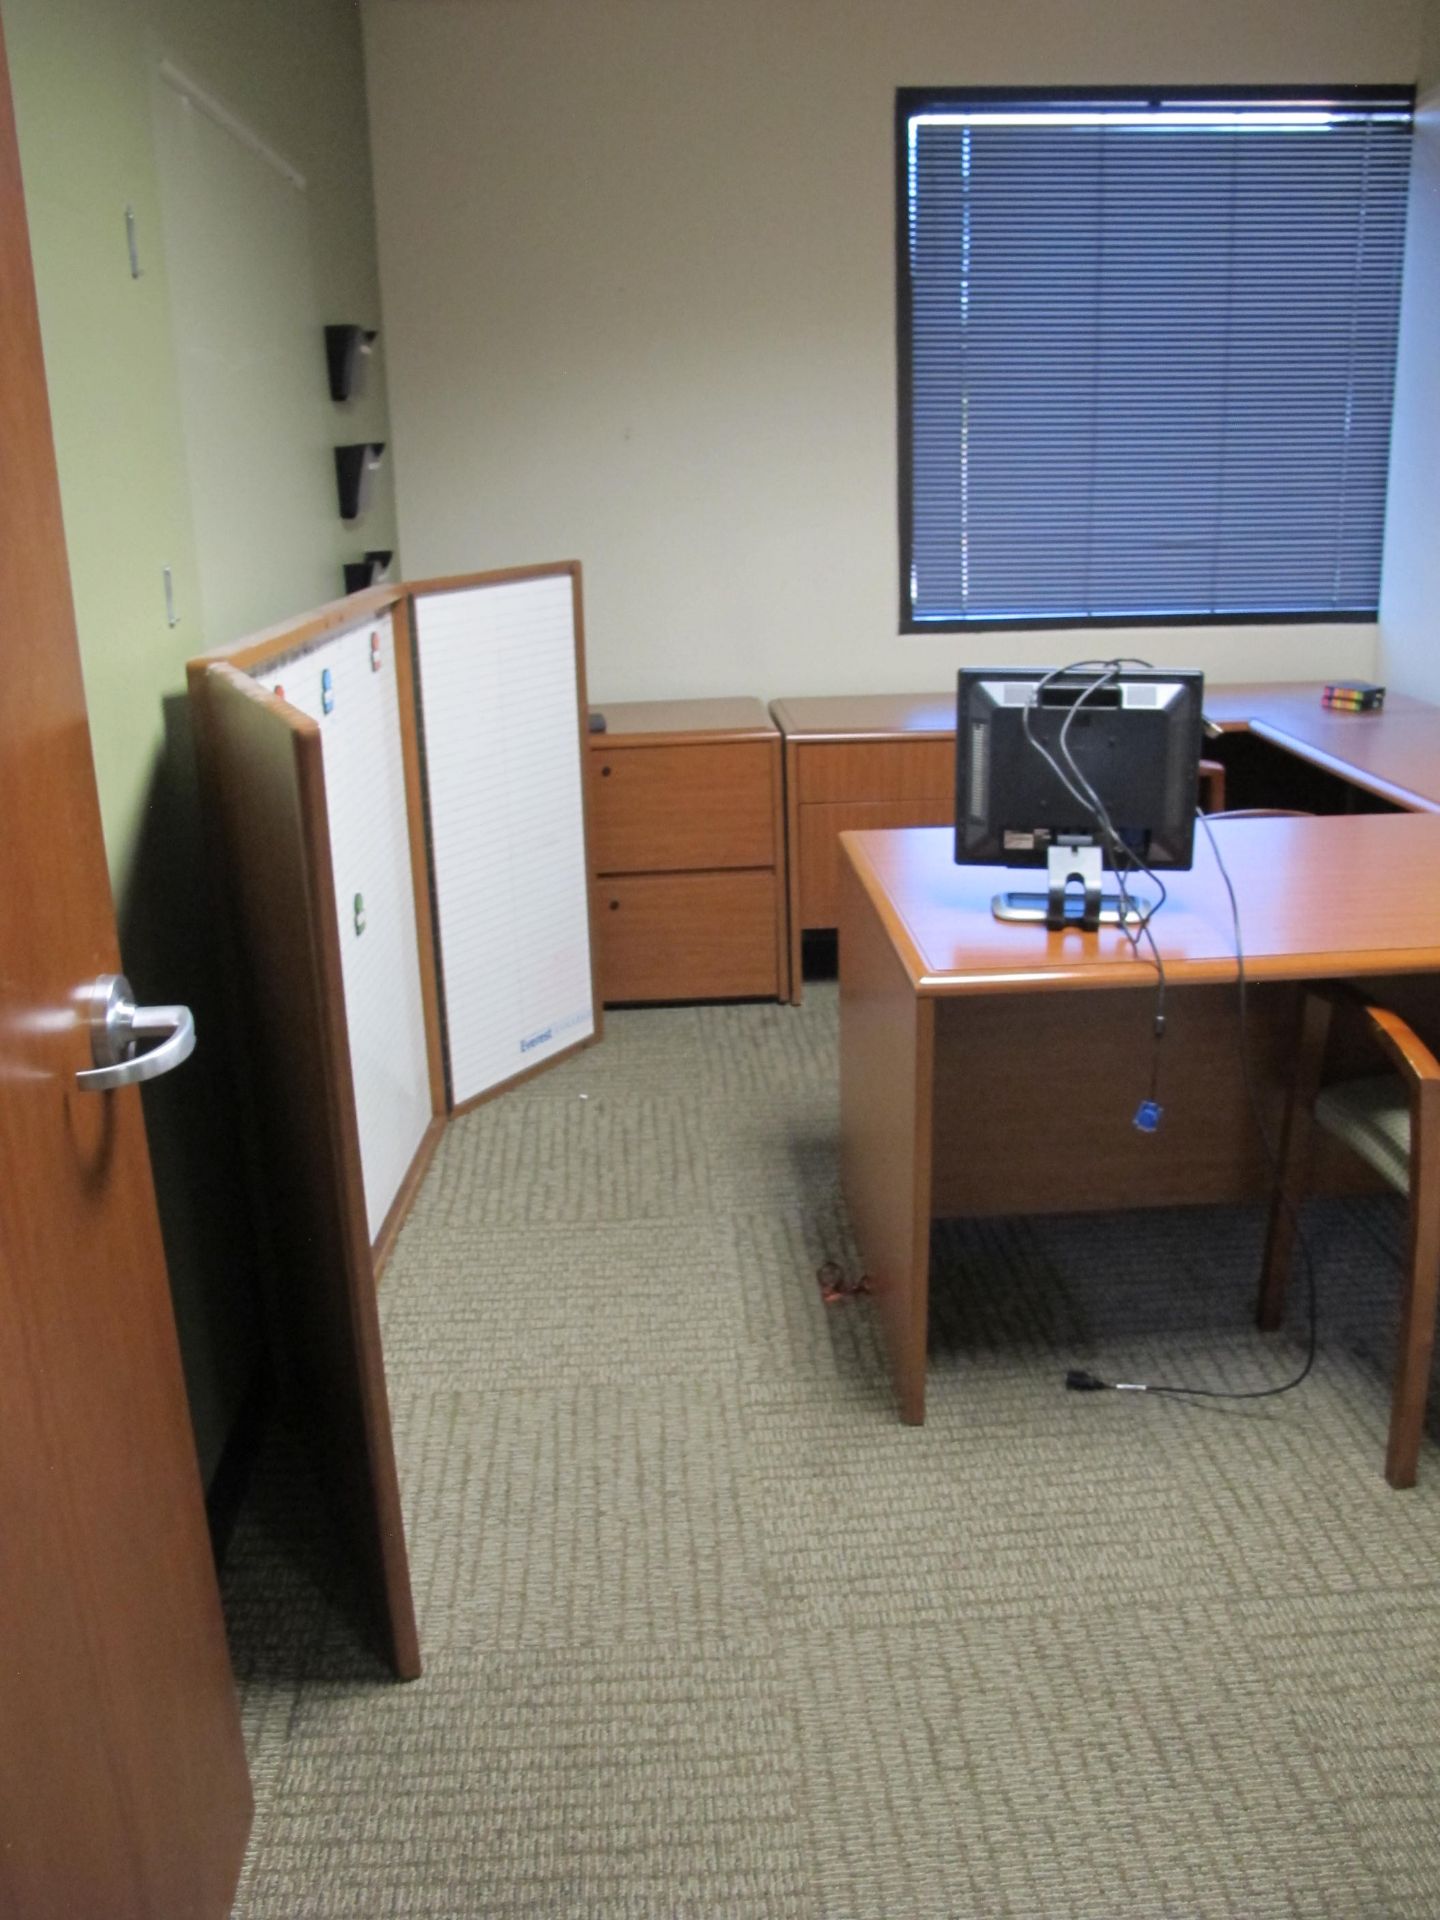 Contents of Room to Include Jr. Executive Desk, Credenza, 2 Drawer Lateral File Cabinet, 2